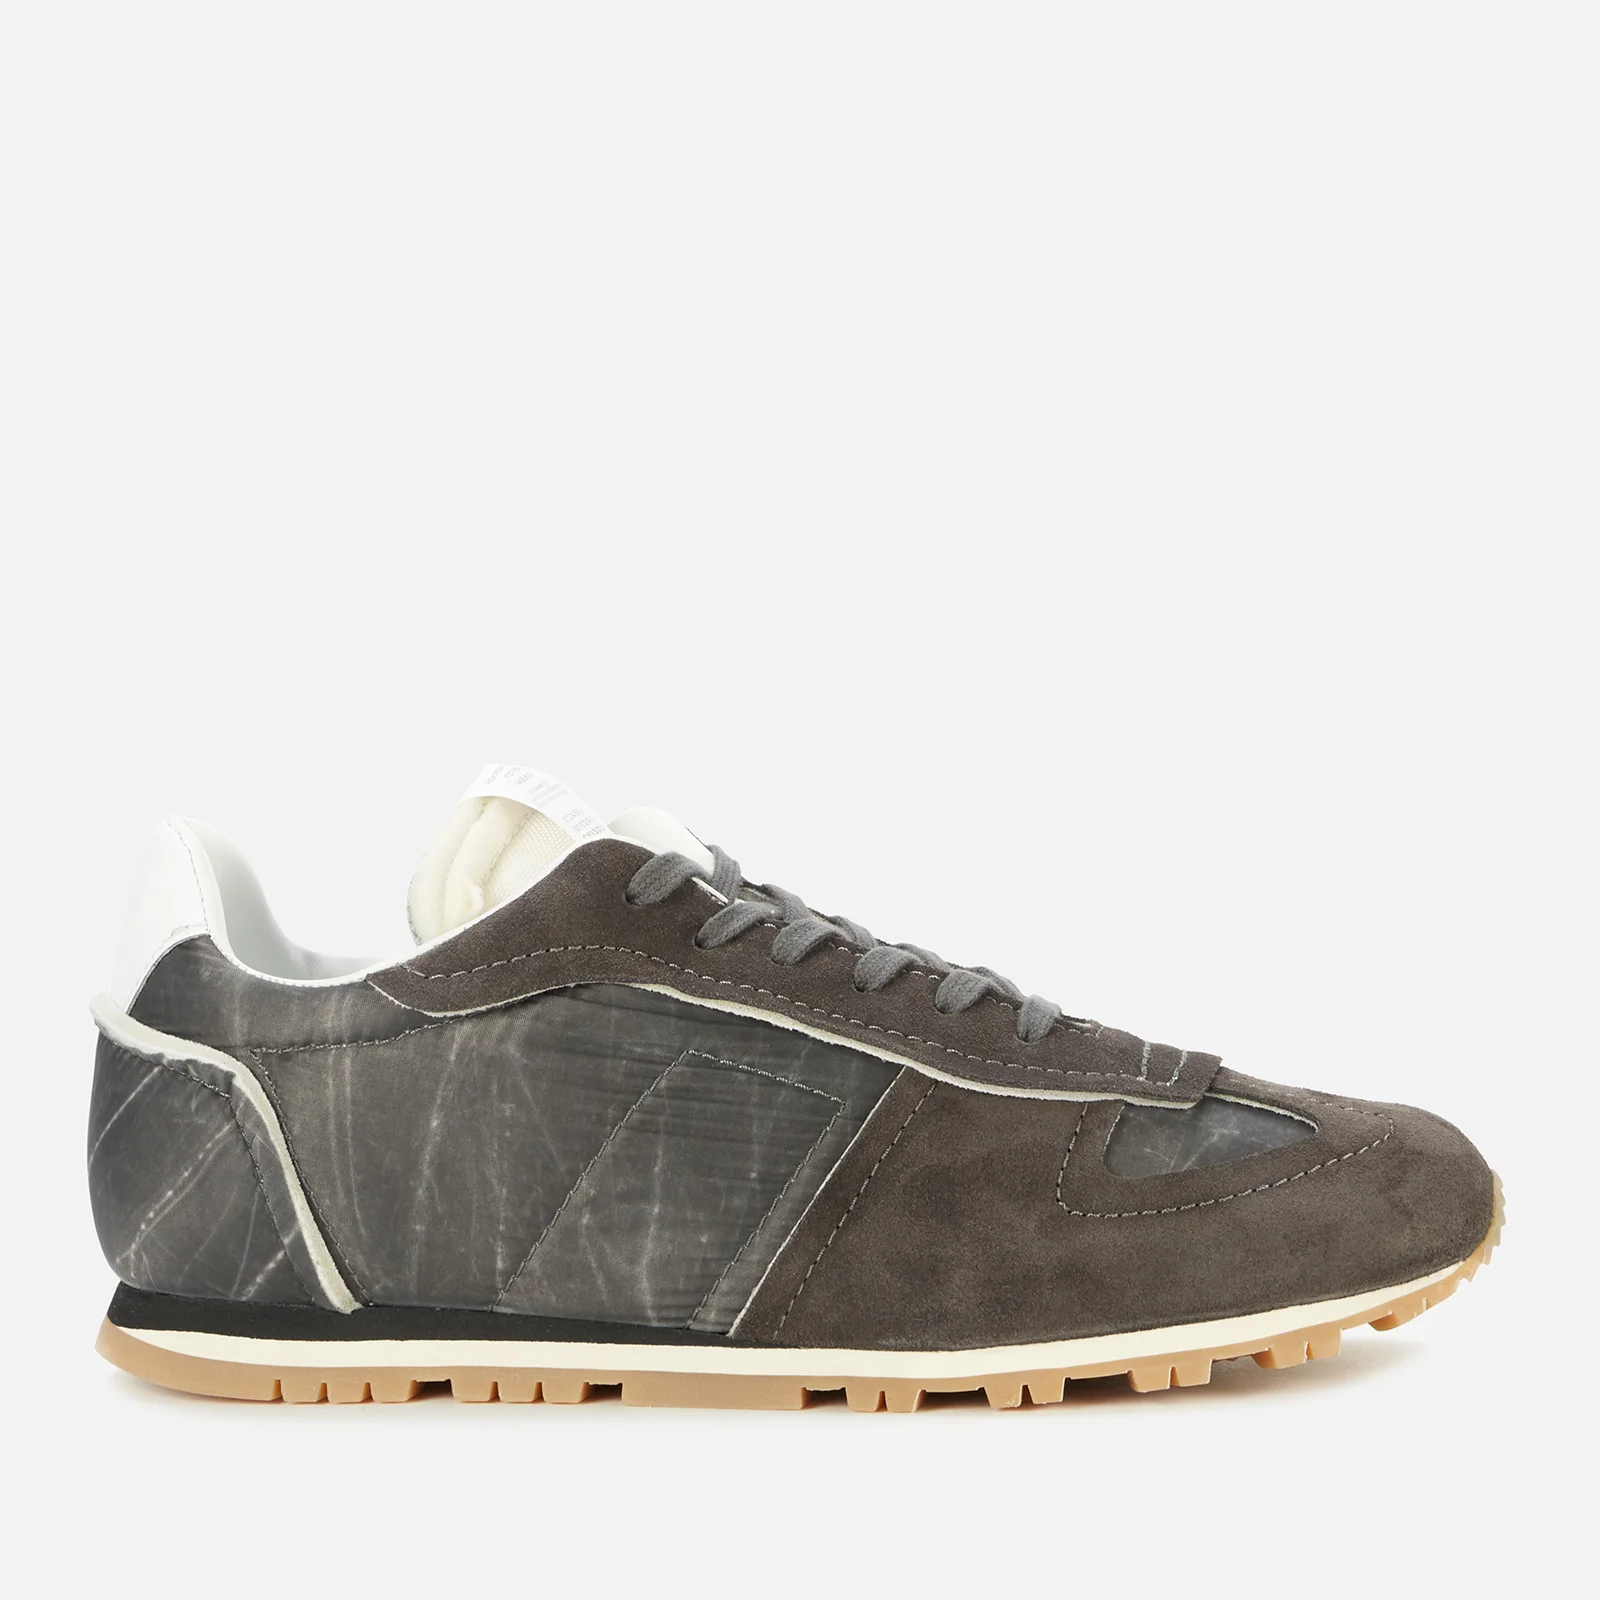 Maison Margiela Men's Retro Running Style Trainers - Charcoal Grey/Anthracite Image 1